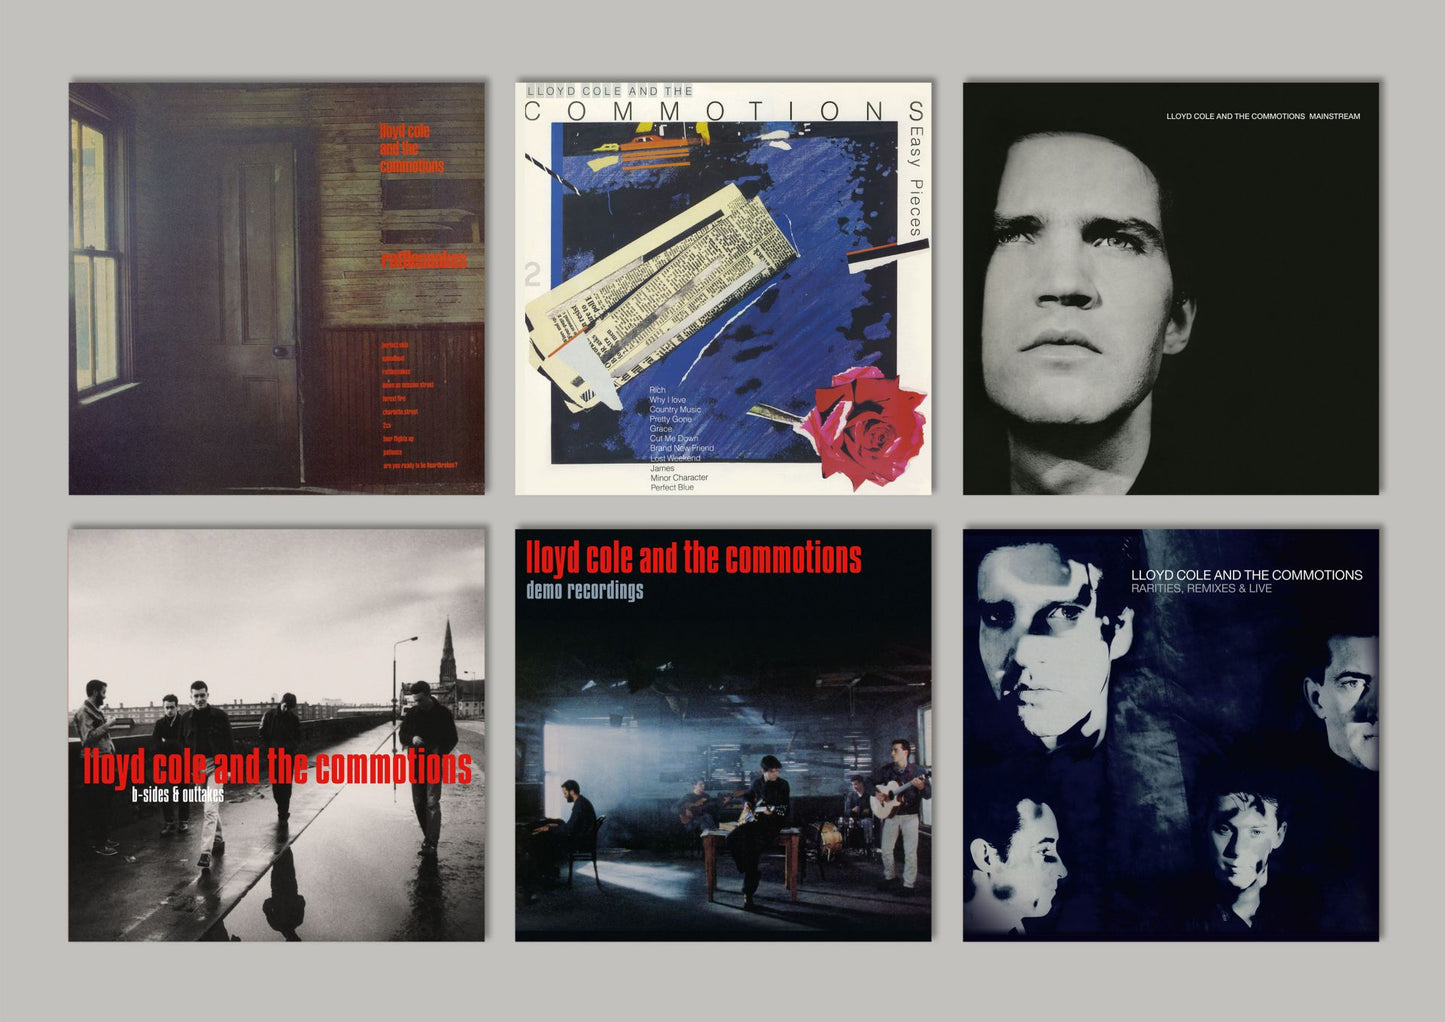 Lloyd Cole and The Commotions / Collected Recordings 1983-1989 - 6LP vinyl box set